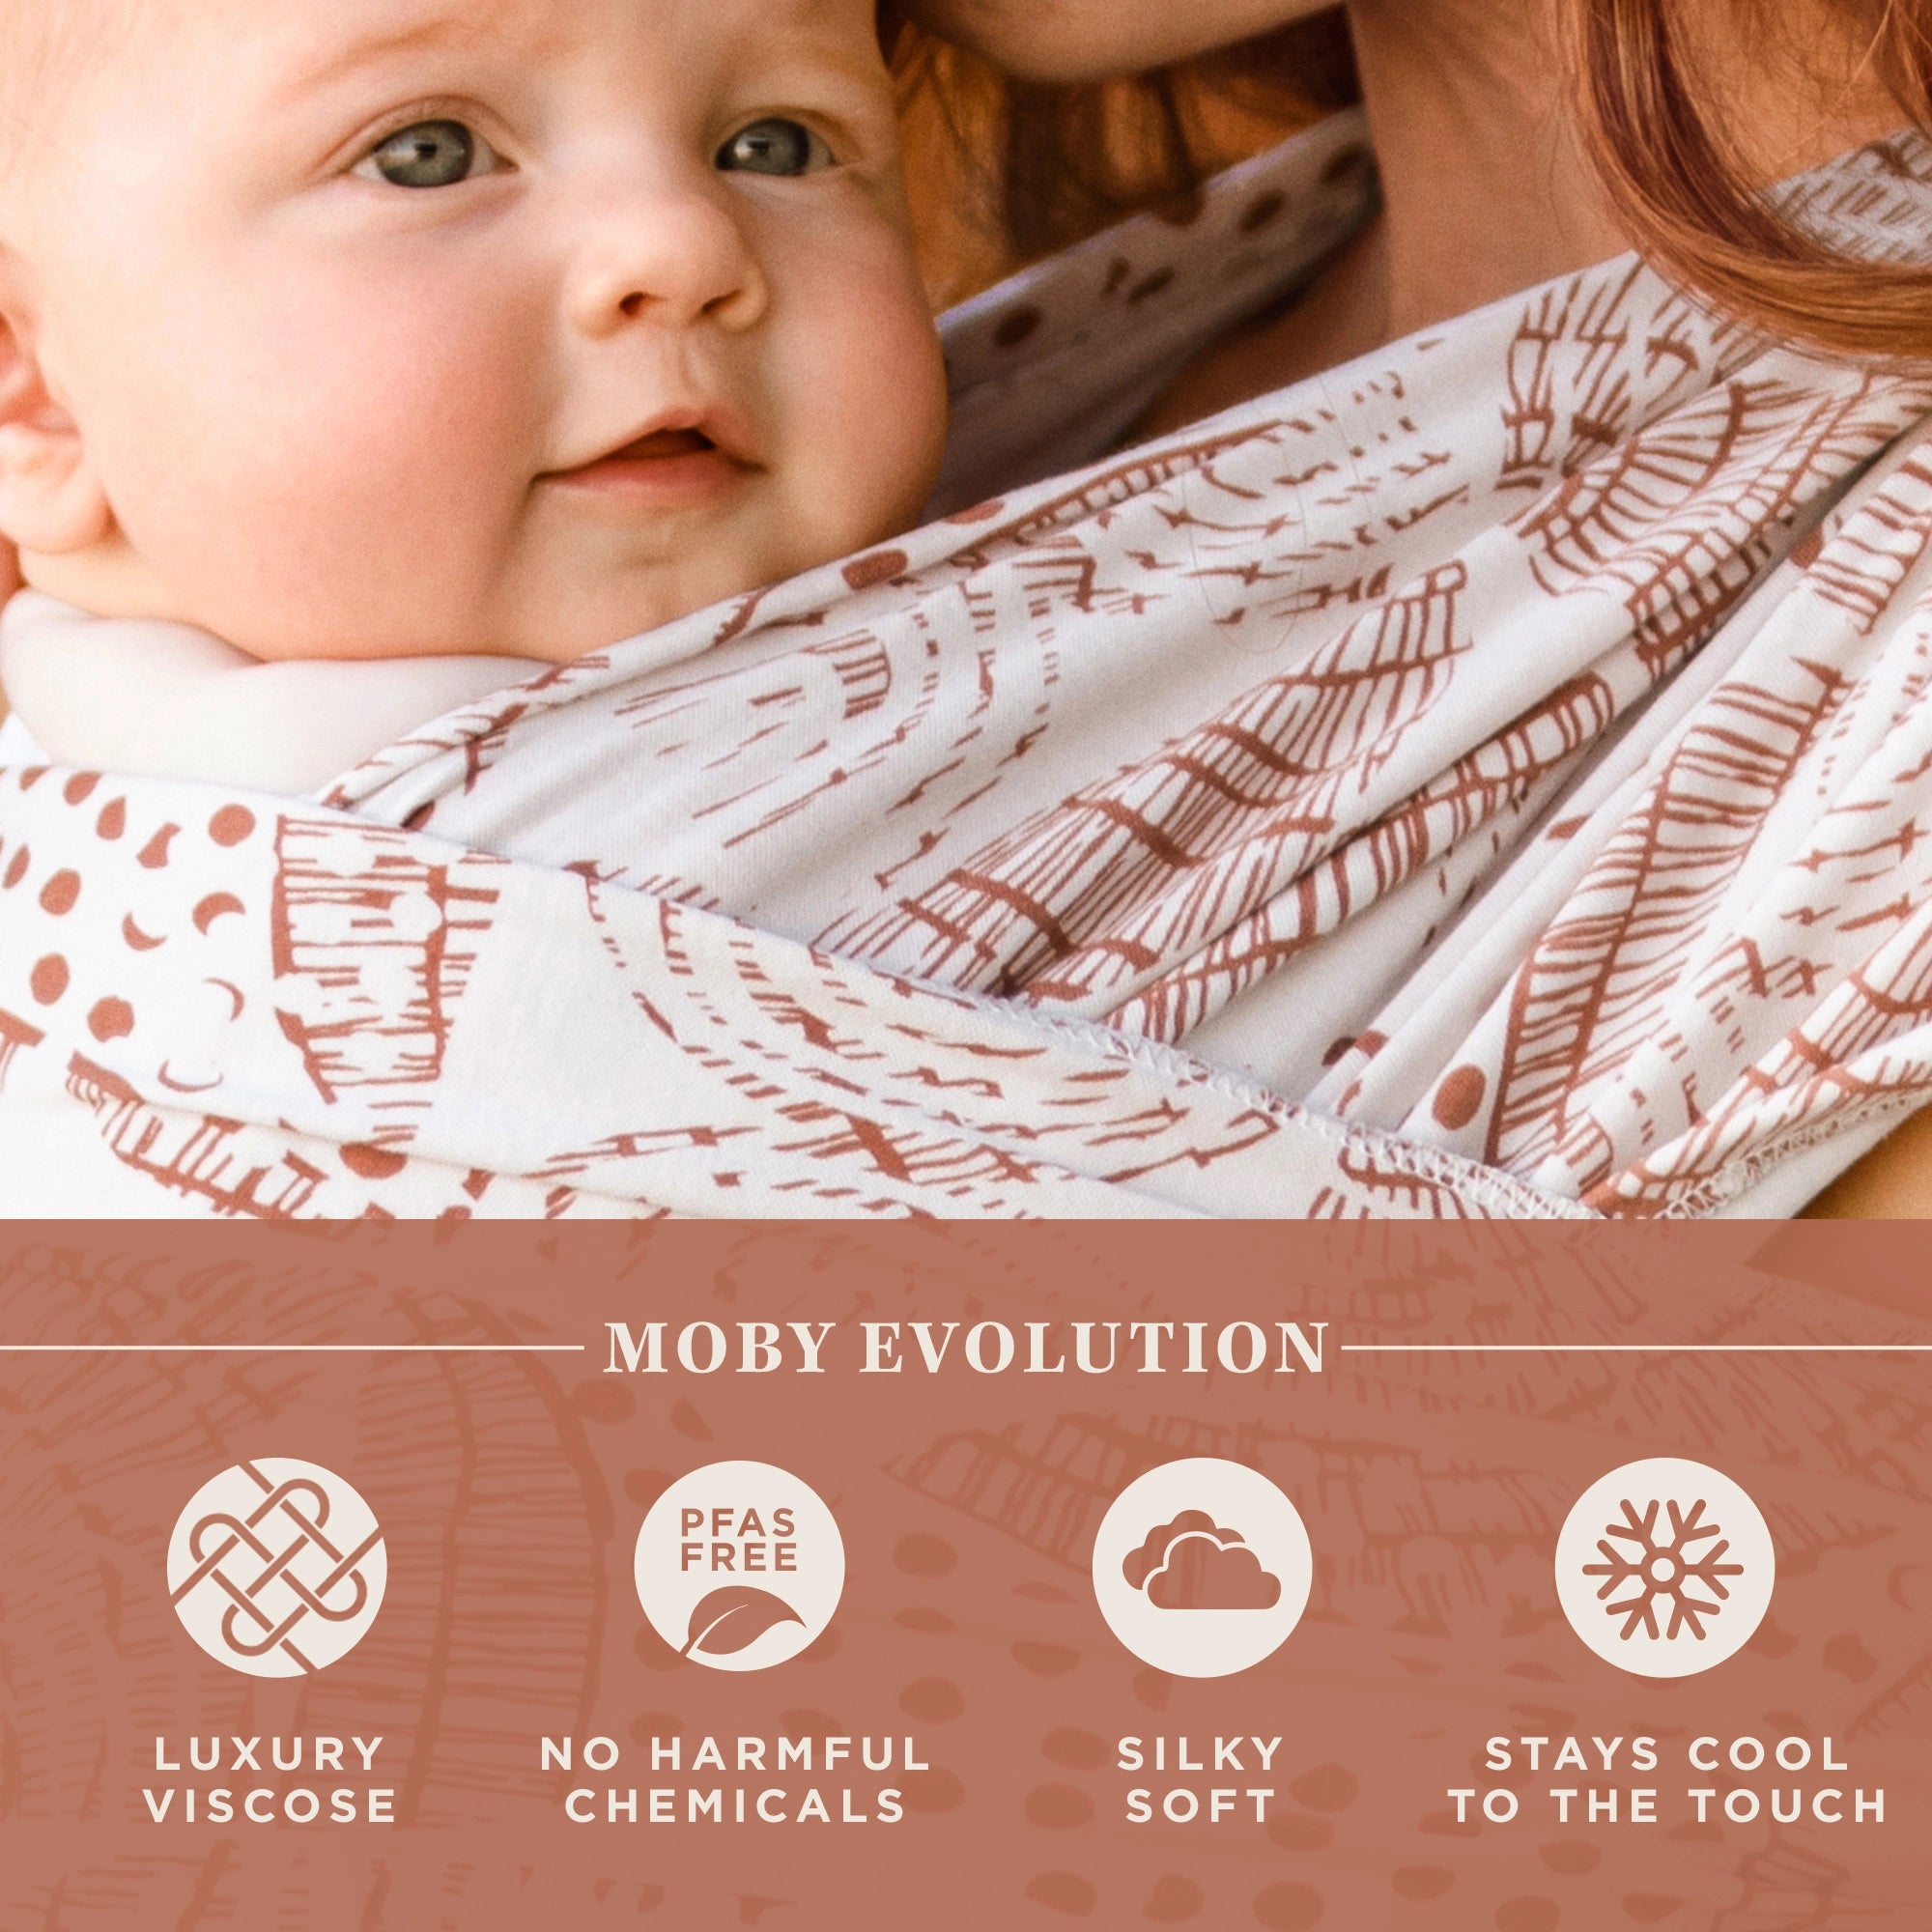 moby wrap evolution features luxury viscose, no harmful chemicals, pfas free, silky soft, stays cool to the touch